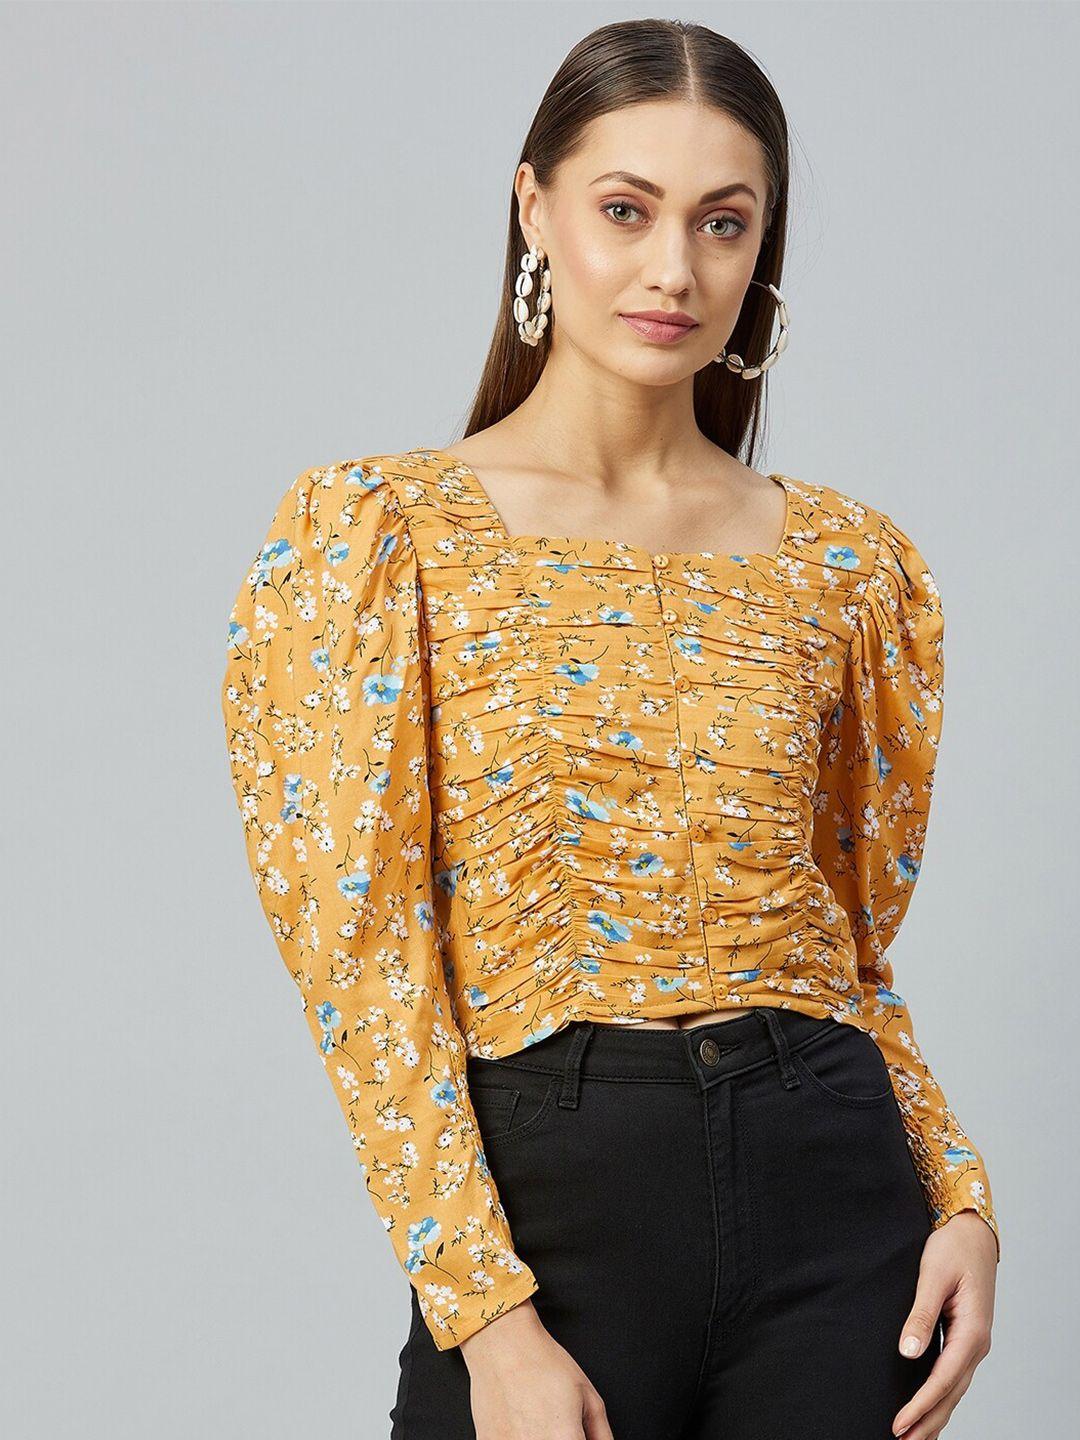 marie-claire-women-mustard-floral-top